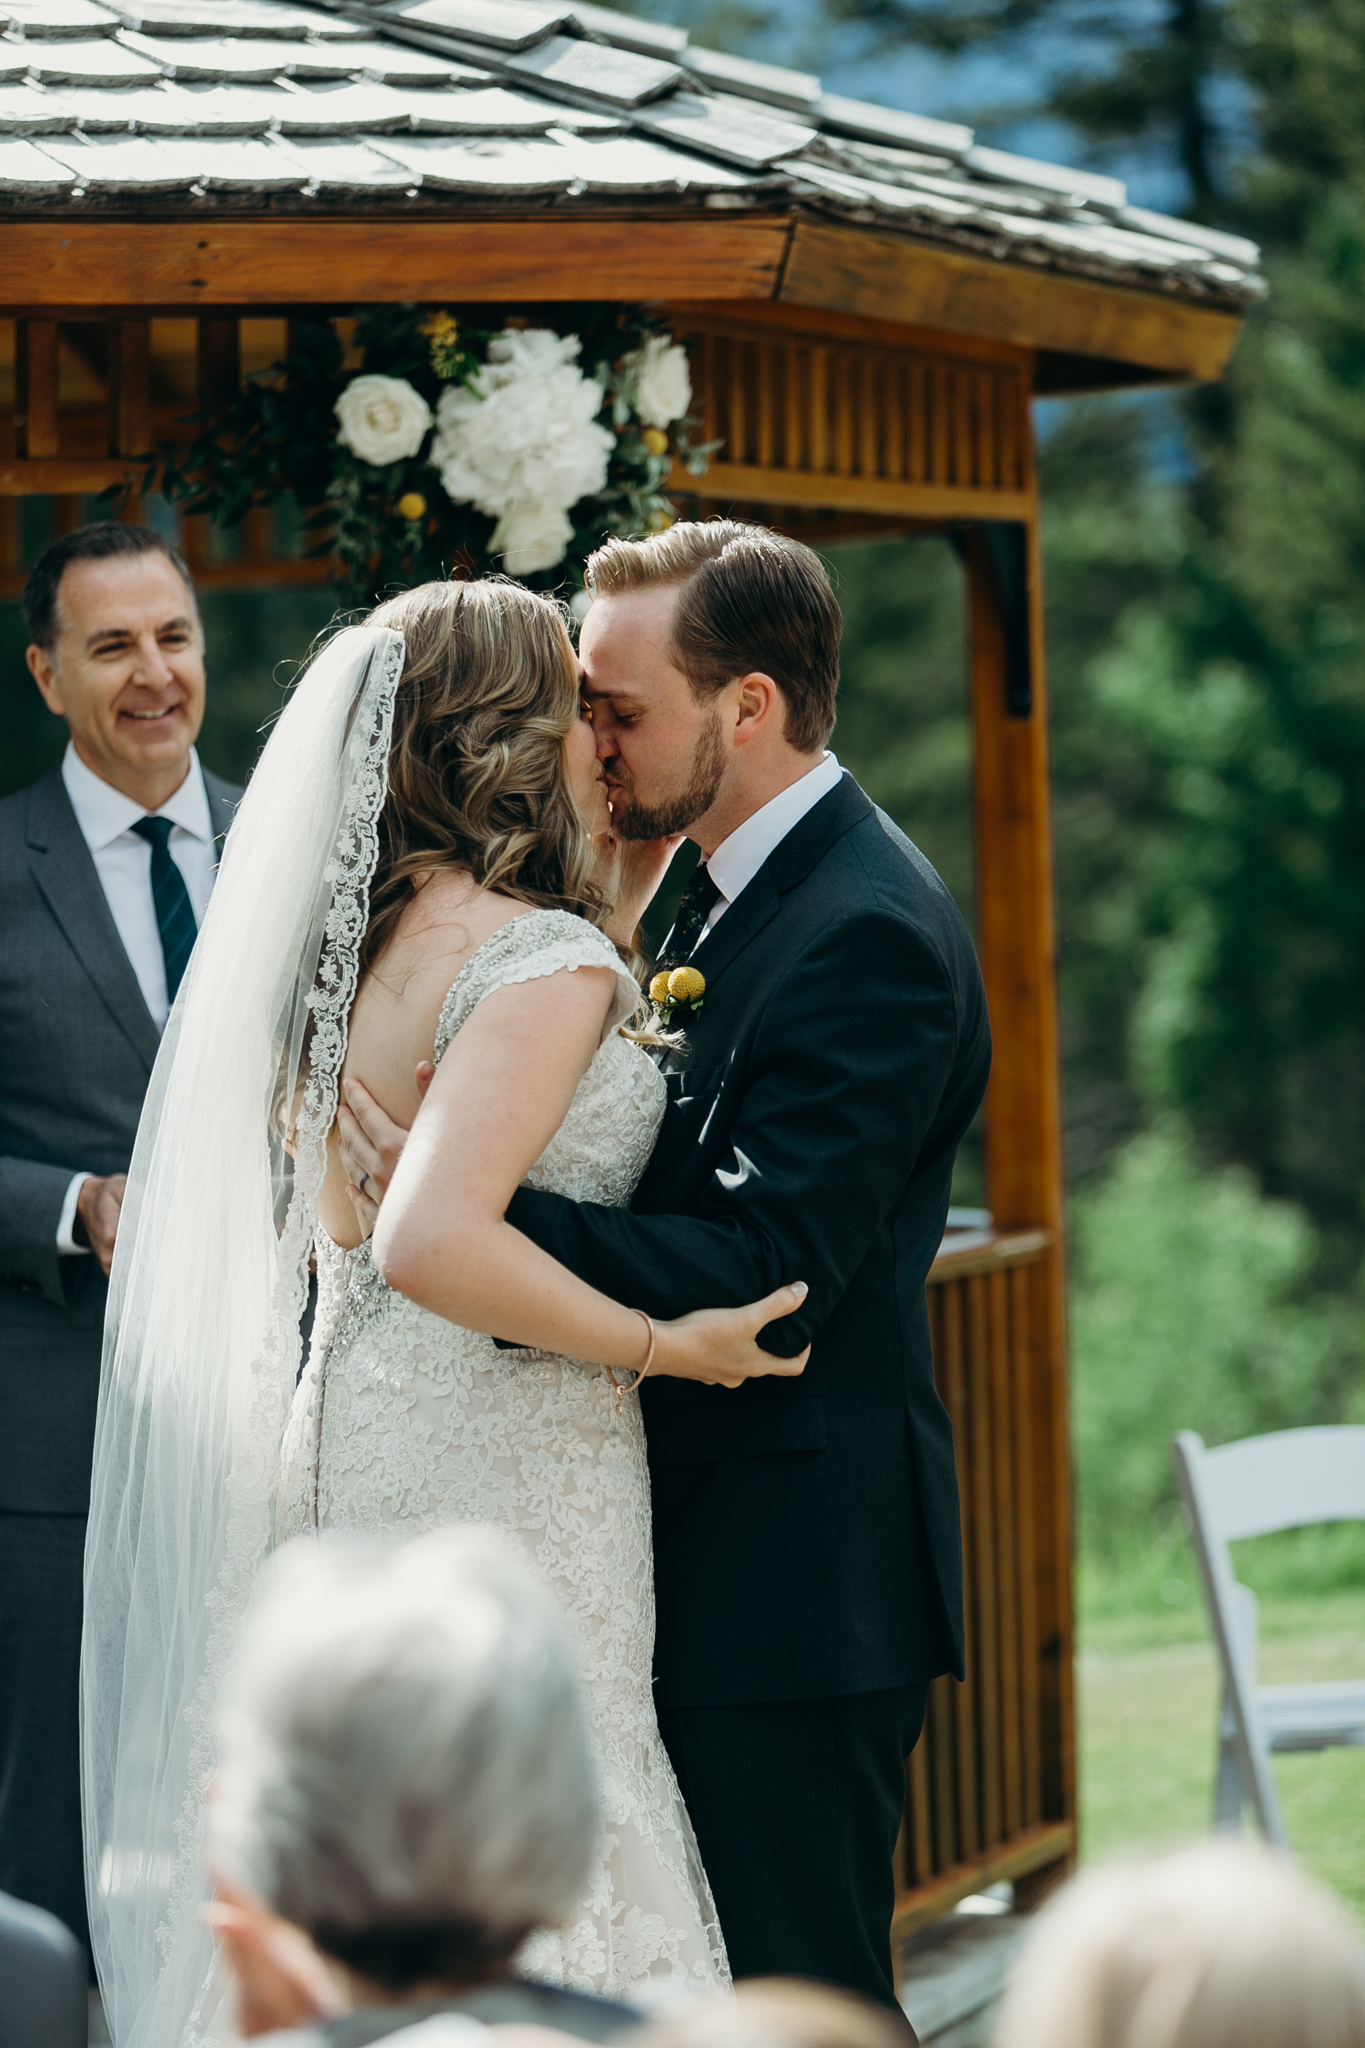 Bride and groom kiss at Silvertip Resort in front of gazebo and mountains